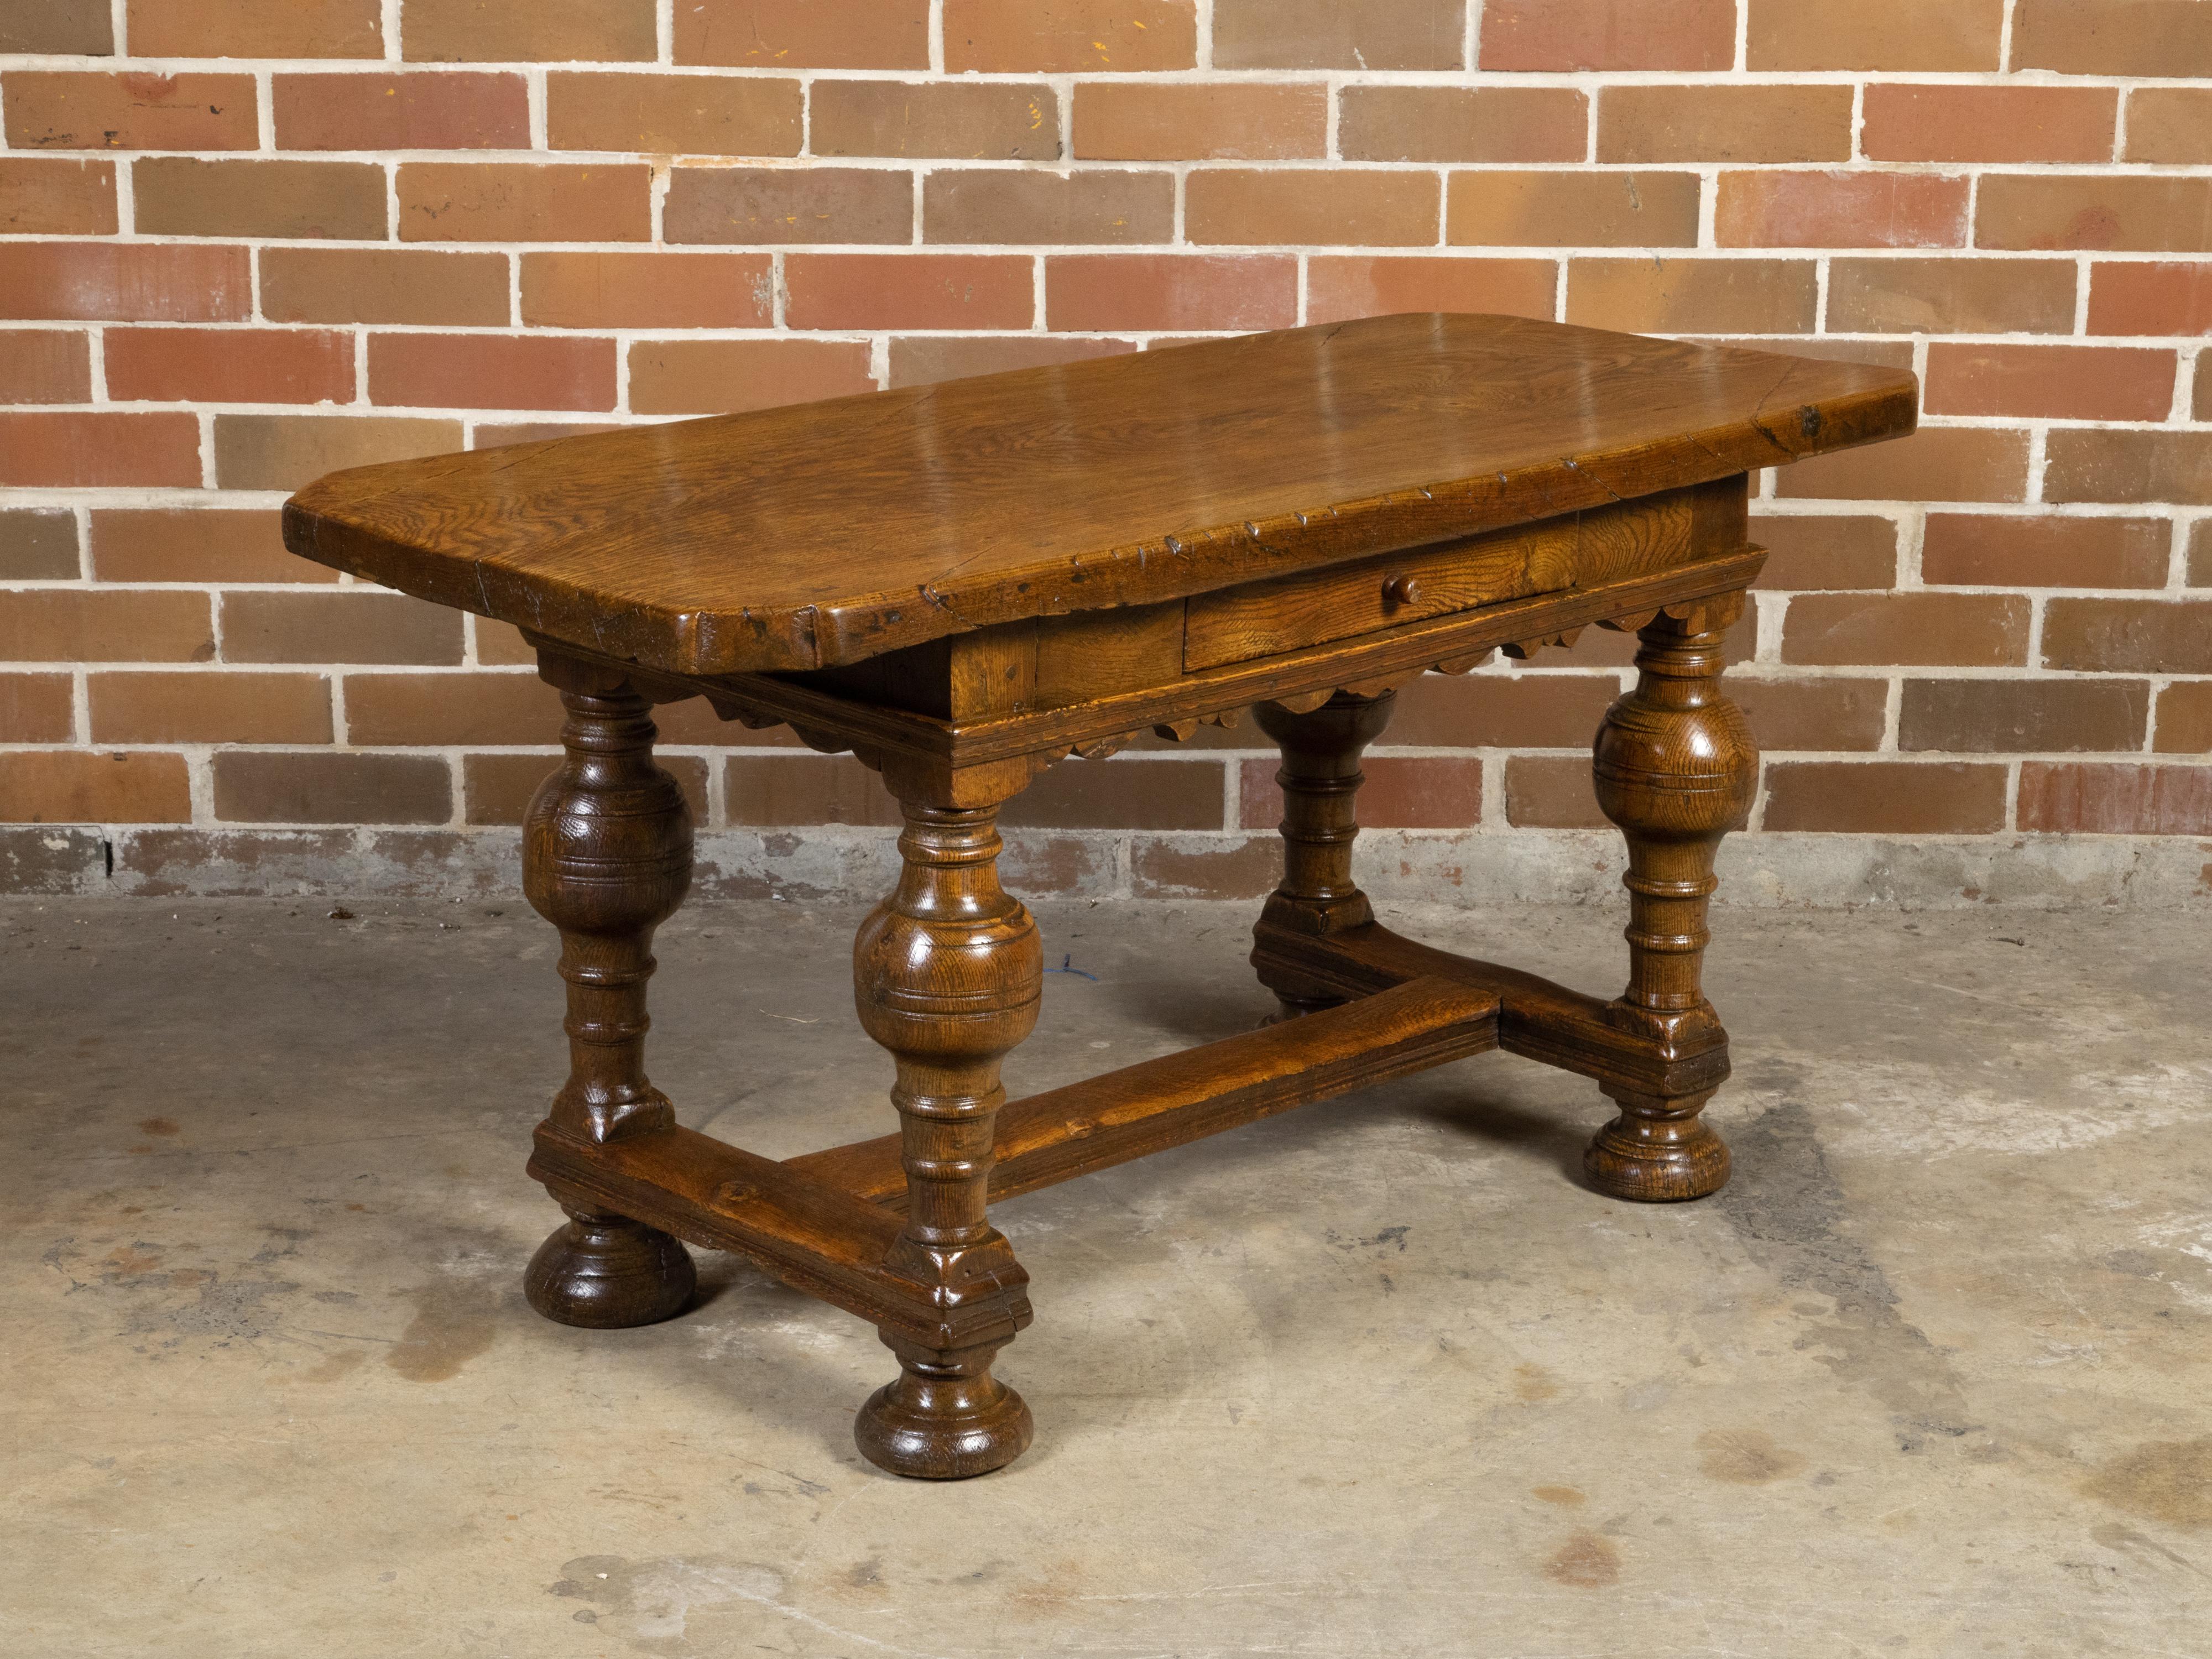 A Southern Danish Baroque style oak center table from the 19th century, with single drawer, carved apron and turned legs. Created on the Danish island of Langeland during the later years of the 19th century, this oak table features a removable